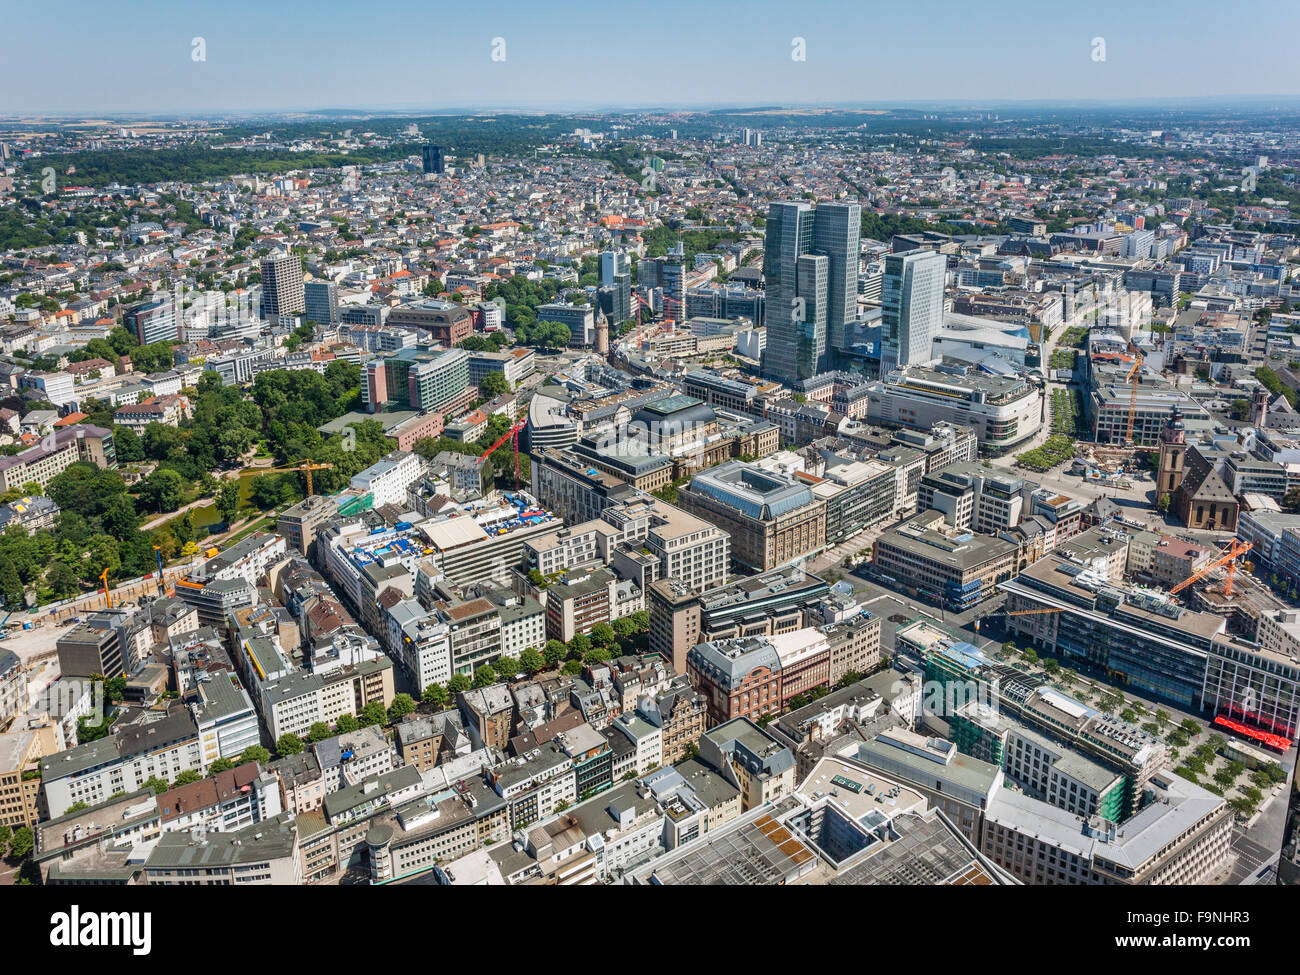 Germany, Hesse, Frankfurt am Main, aerial view of Frankfurt city centre with Goethestrasse, Zeil Galerie and Stock Exchange Stock Photo